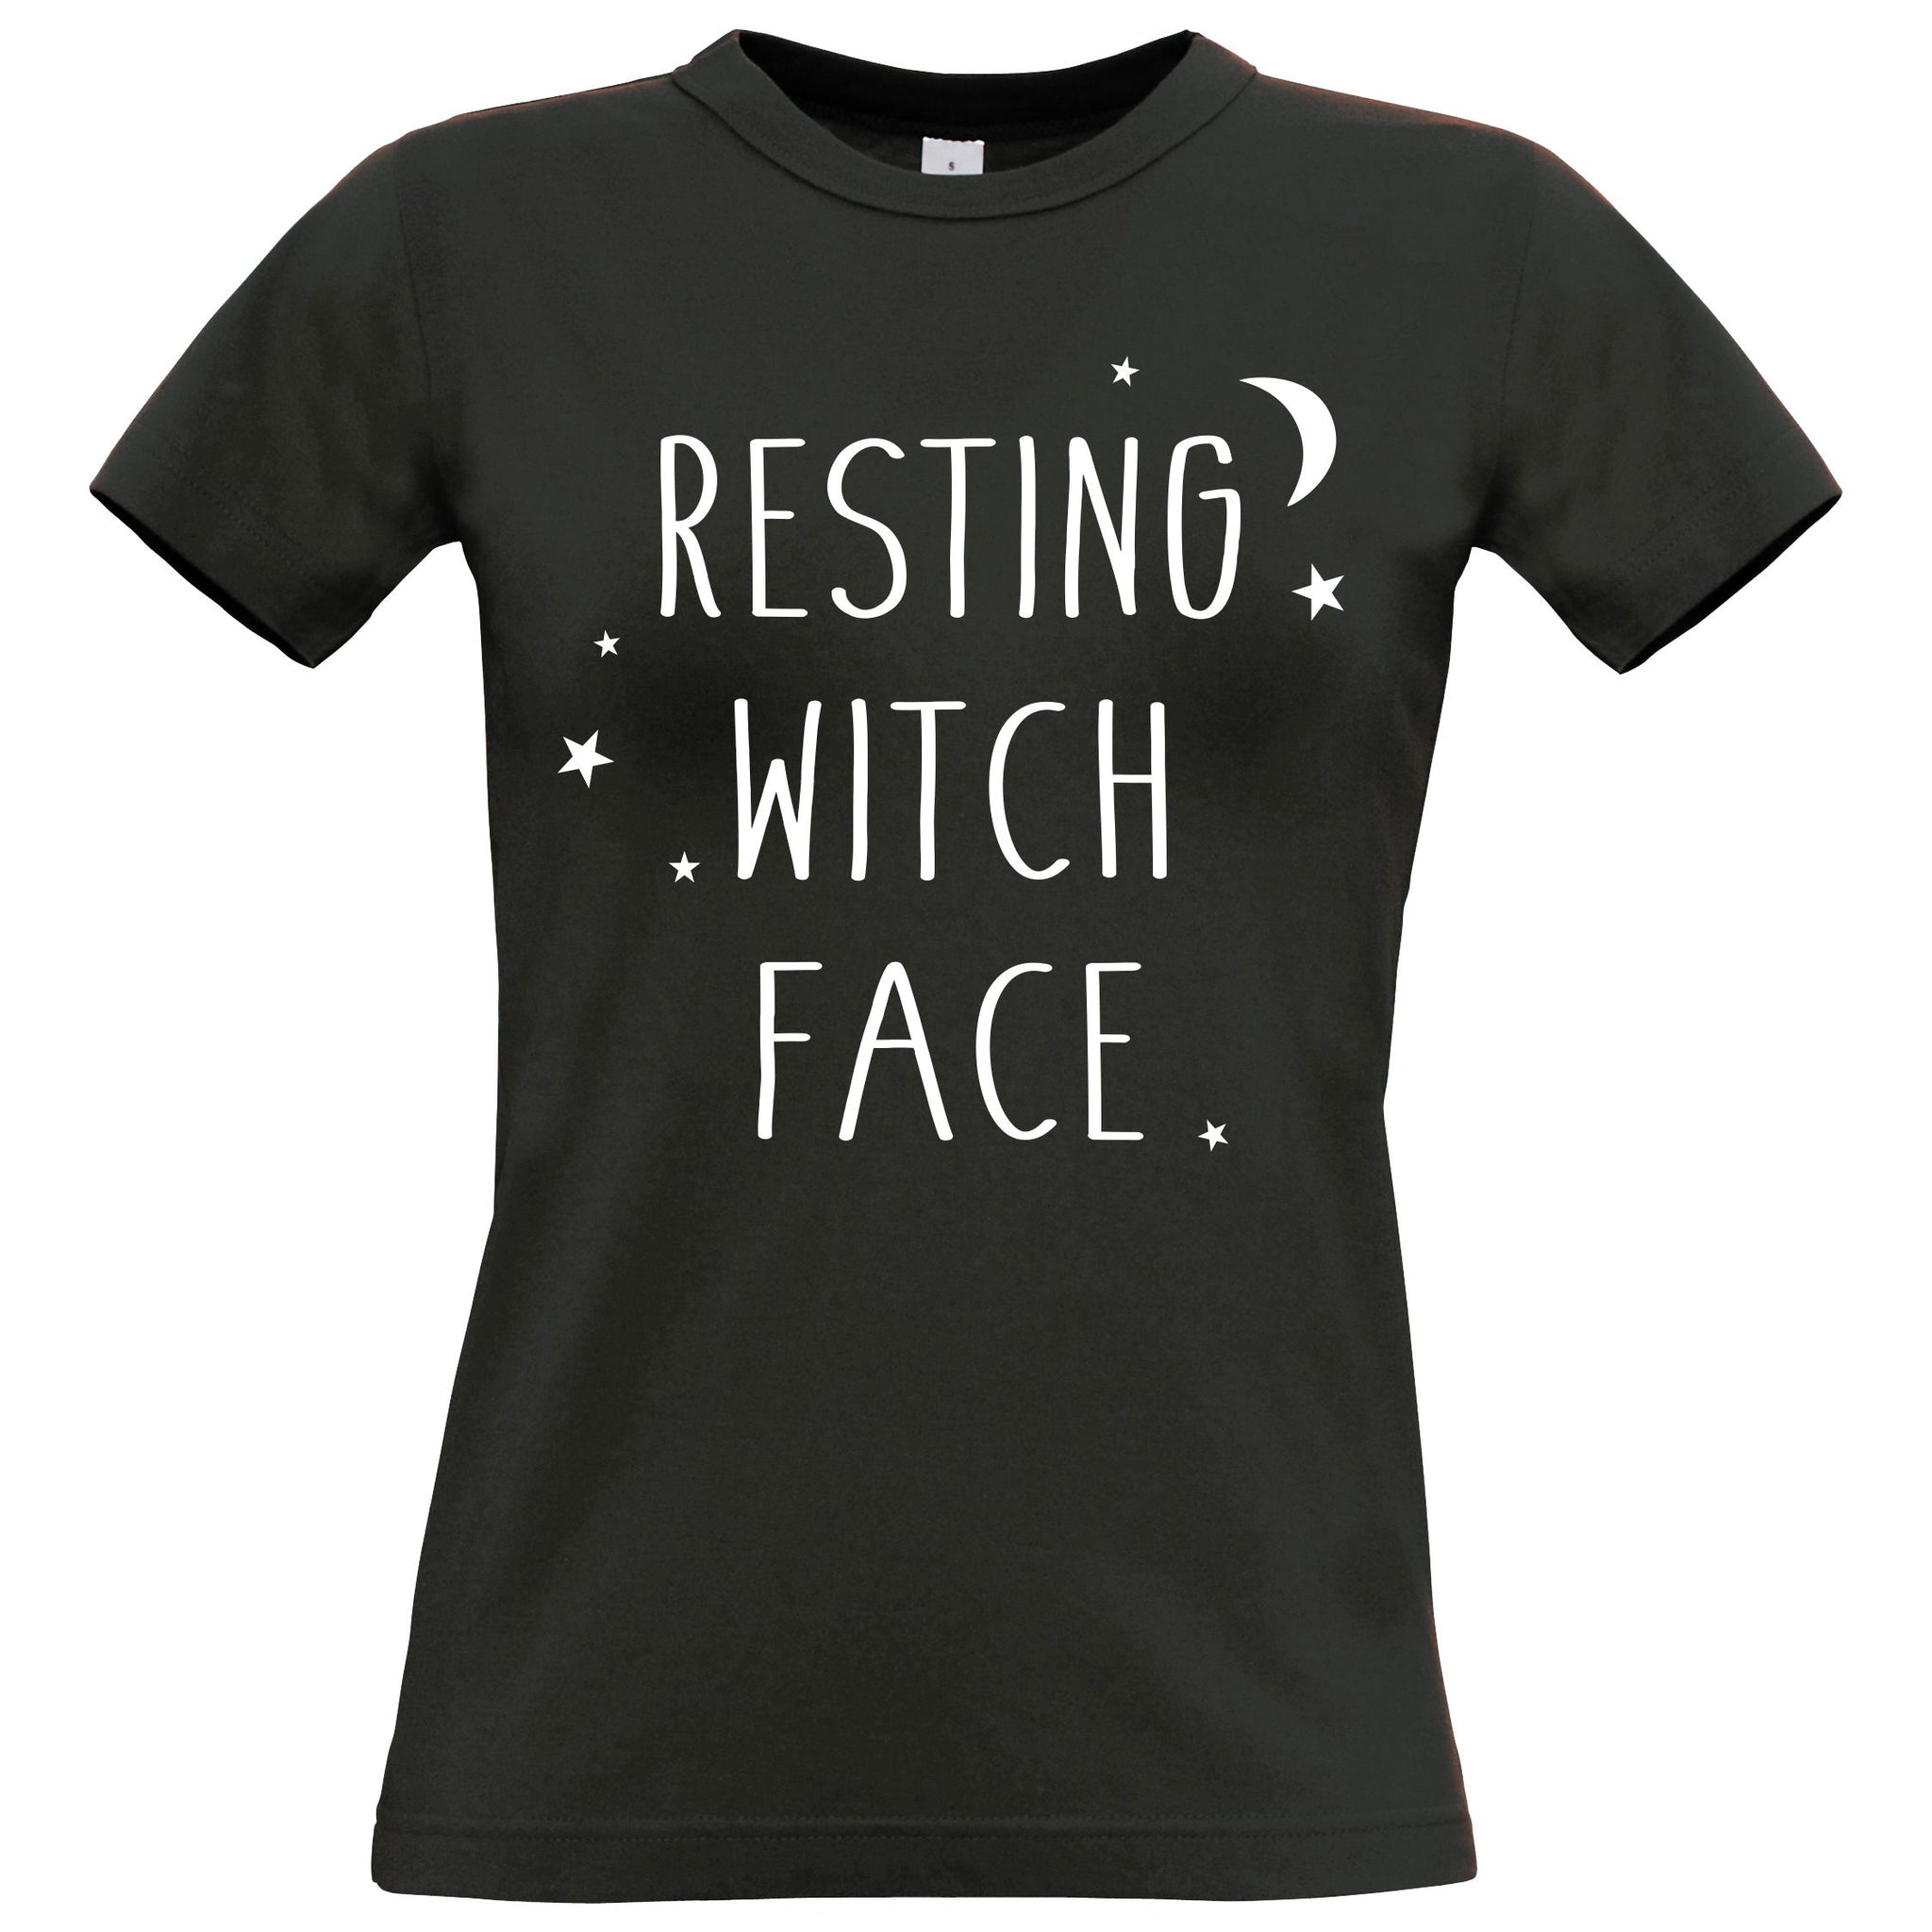 Resting Witch Face Women's Fitted T Shirt